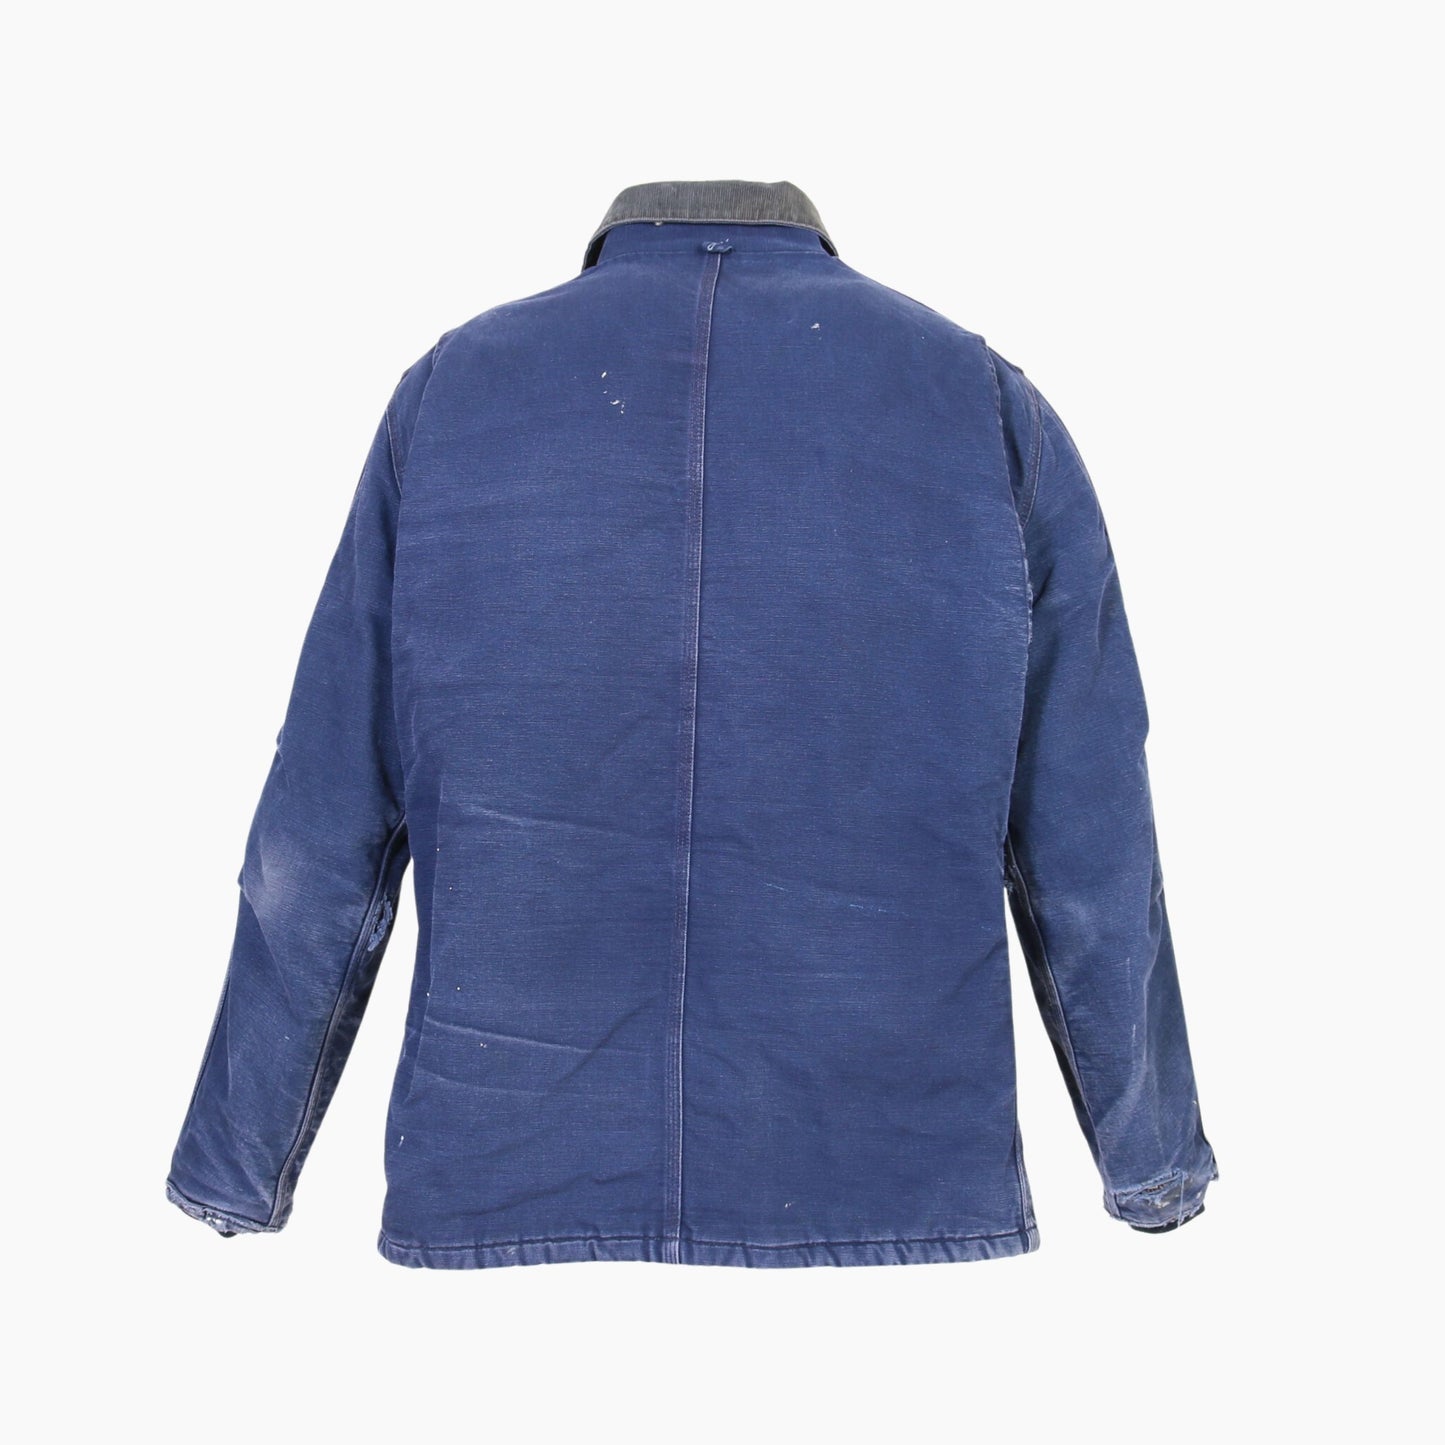 Arctic Jacket - Washed Navy - American Madness